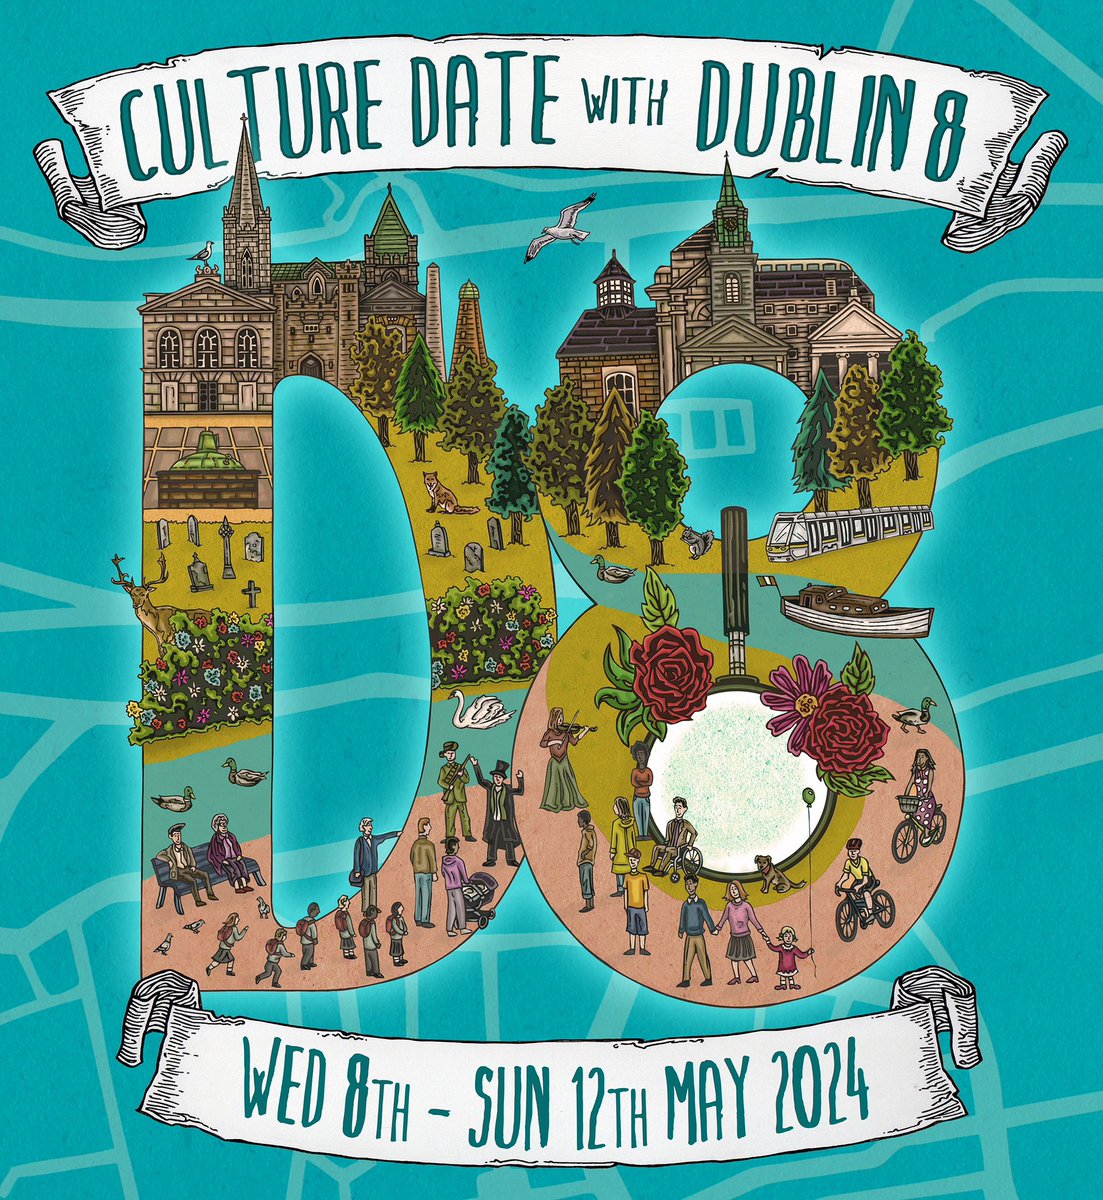 Only 6 more sleeps to the launch of the biggest Culture Date With Dublin 8 programme to date. Keep an eye on culturedatewithdublin8.ie for all the details. And save those culture dates! 8th to 12th May 2024 @CultureDateD8